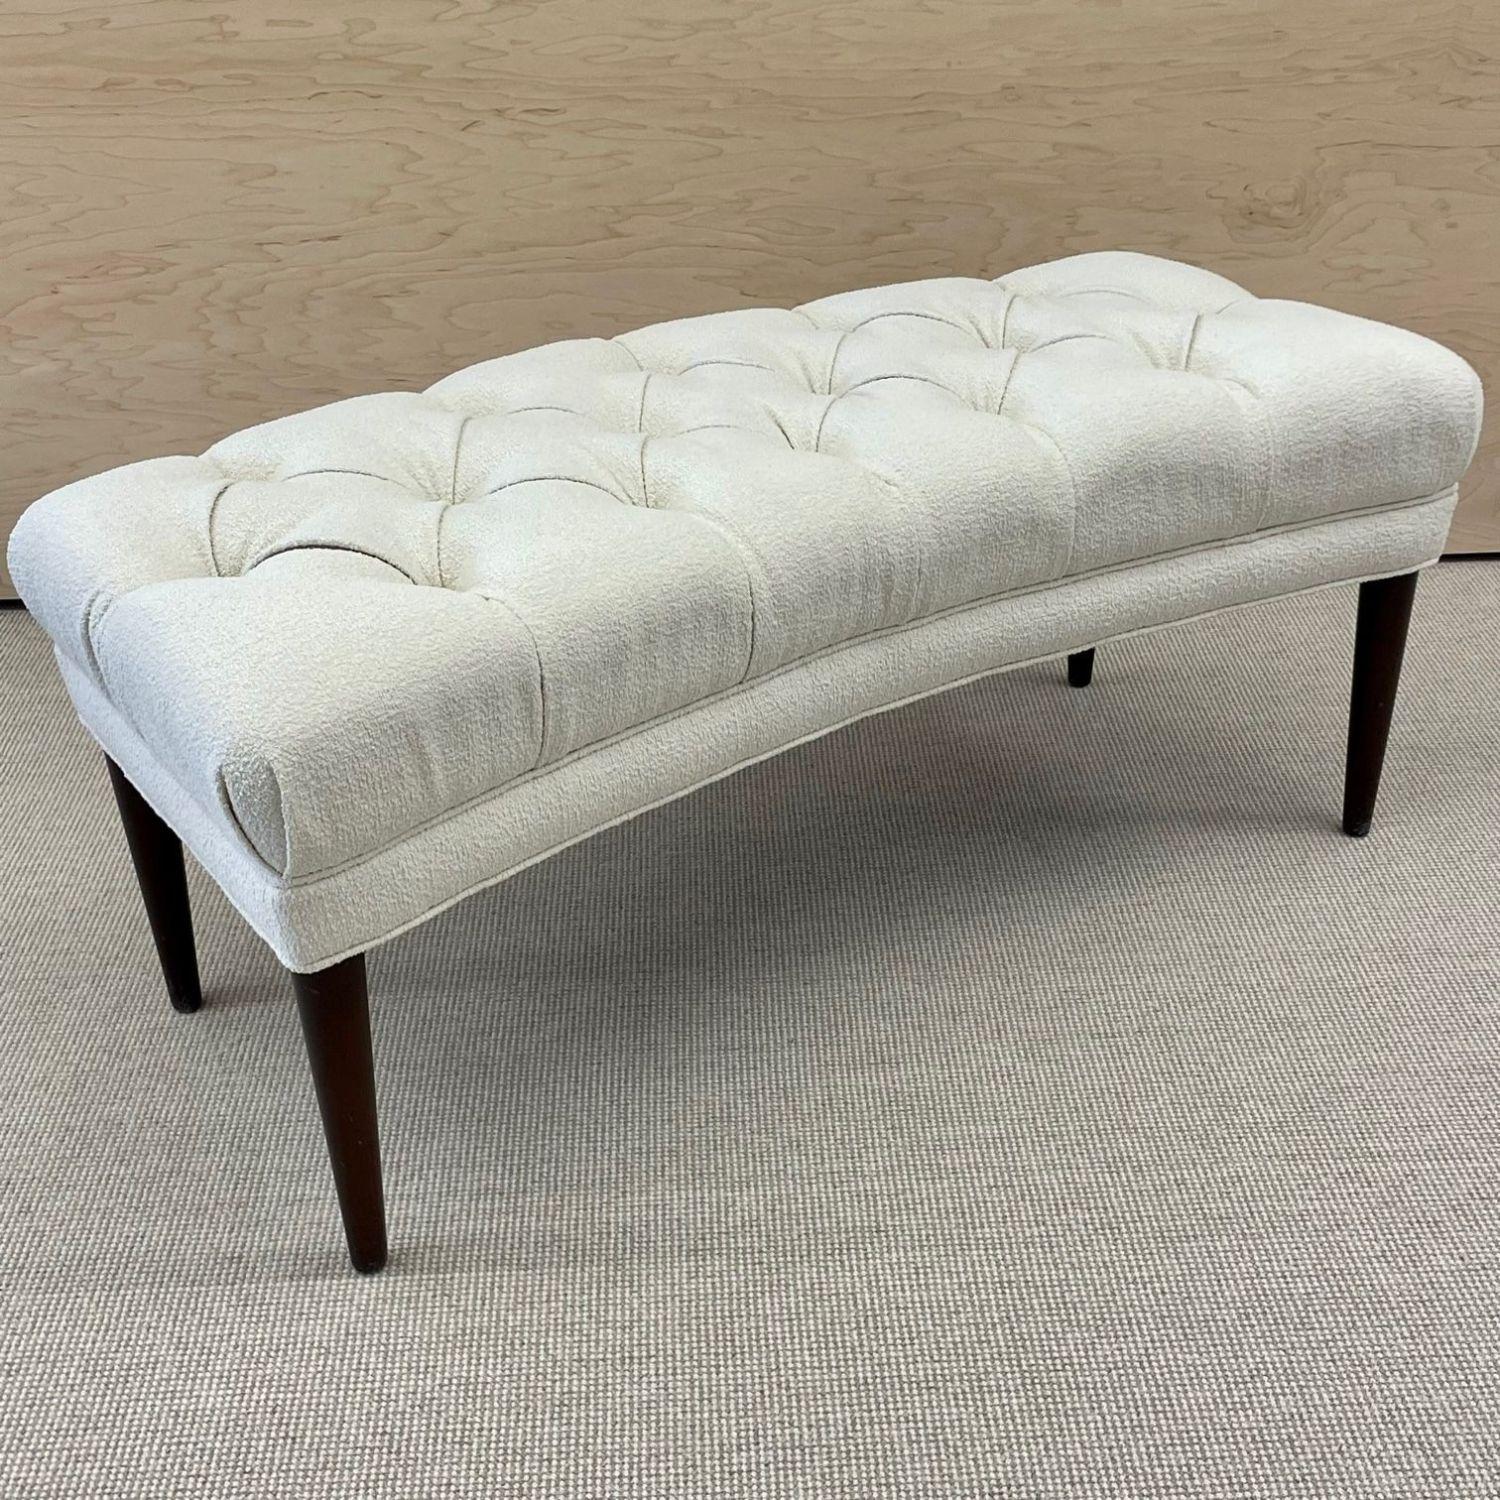 Mid-Century Modern Freeform Tufted Bench, American Designer, Ebony Wood, Bouclé In Good Condition For Sale In Stamford, CT